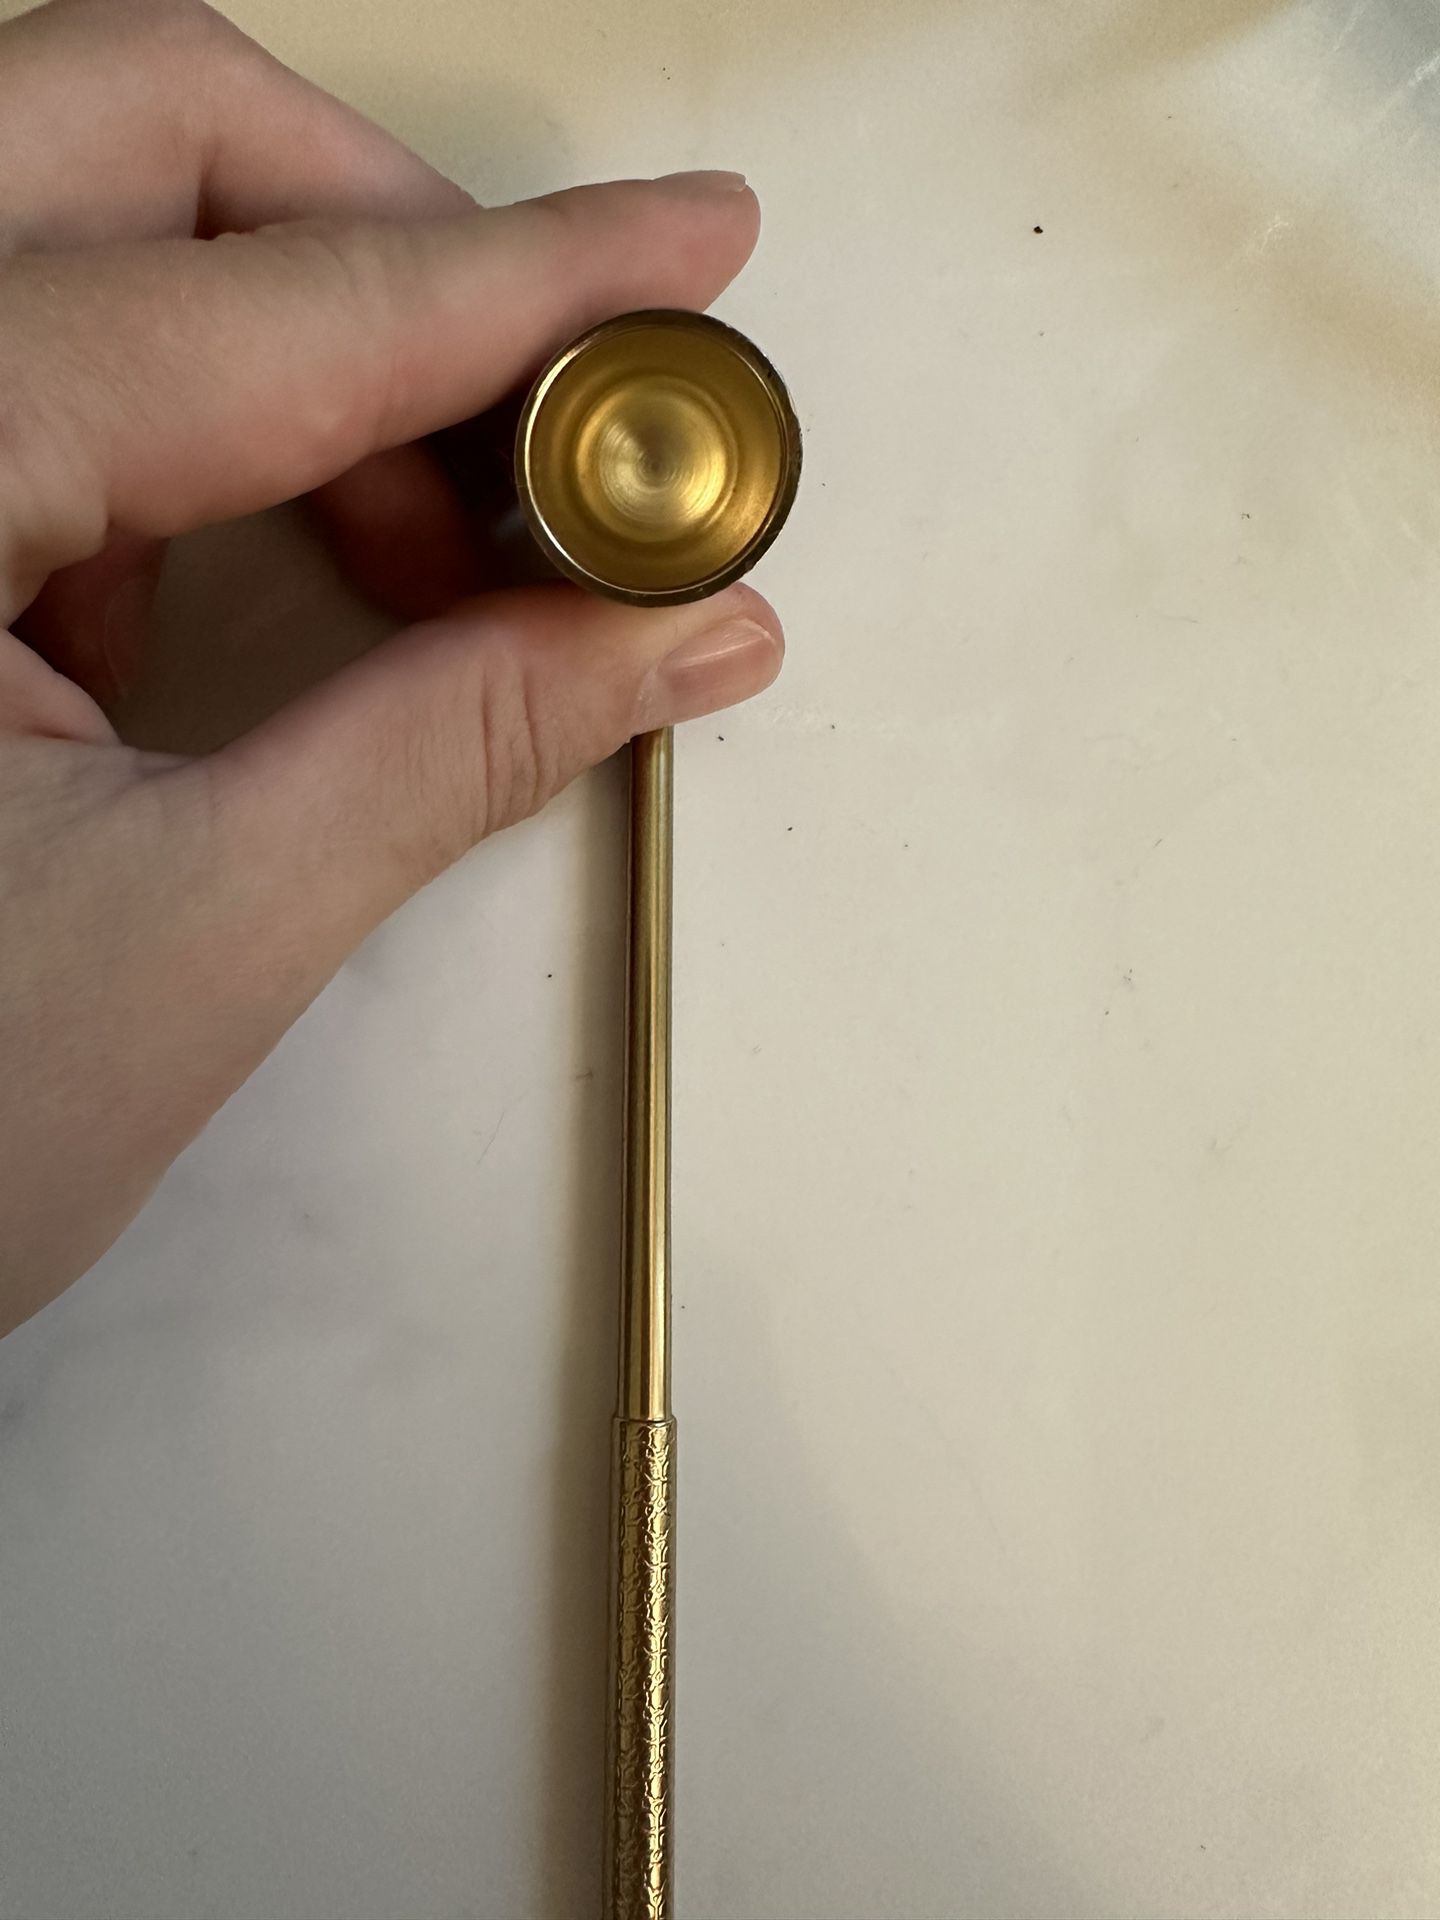 Yankee Candle Snuffer NEW never used 